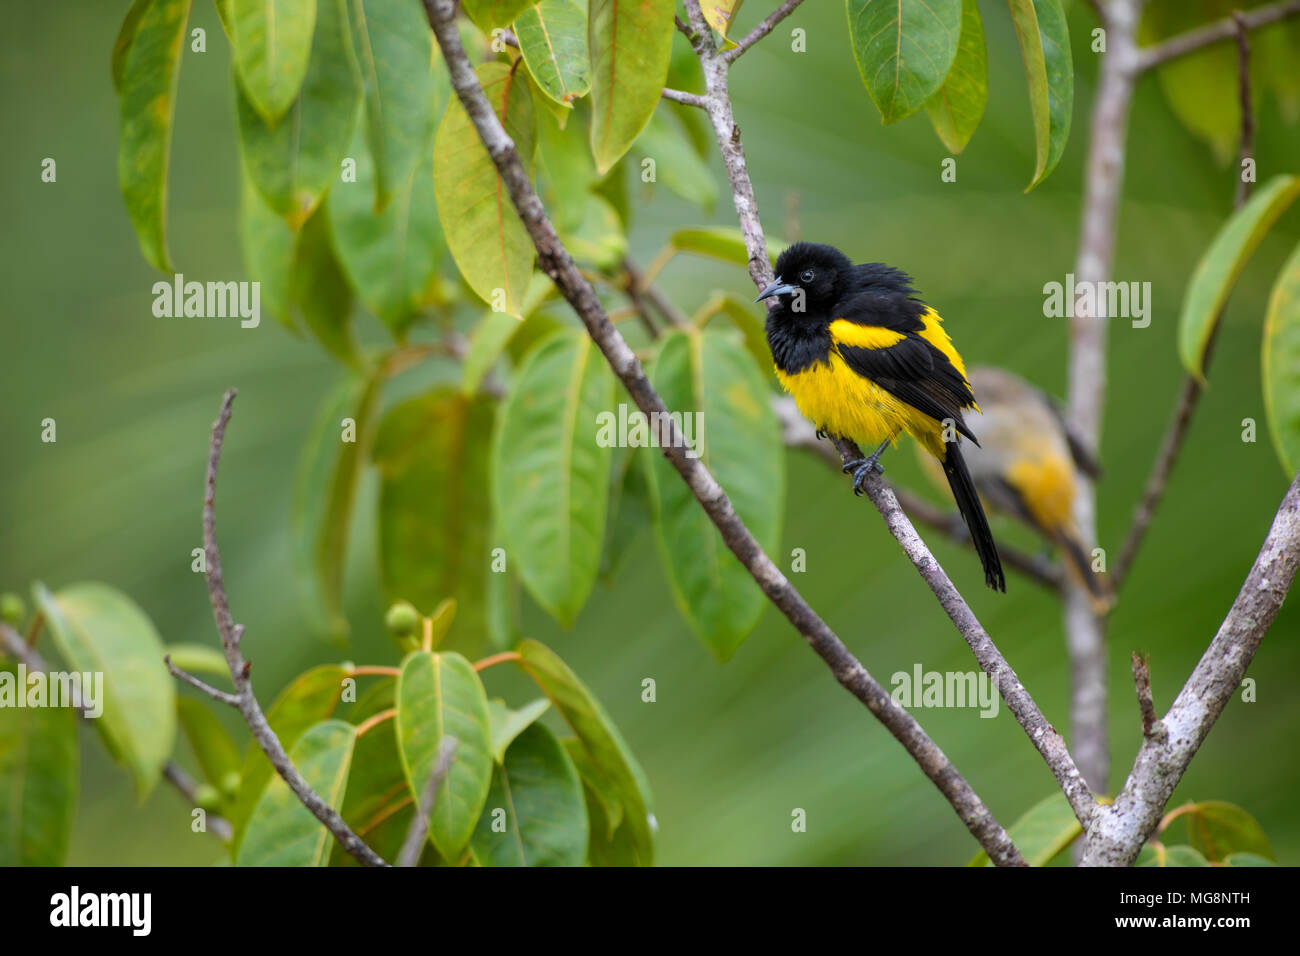 Hispaniolan Oriole - Icterus dominicensis, beatiful yellow and black perching bird from Central America forests, Costa Rica. Stock Photo